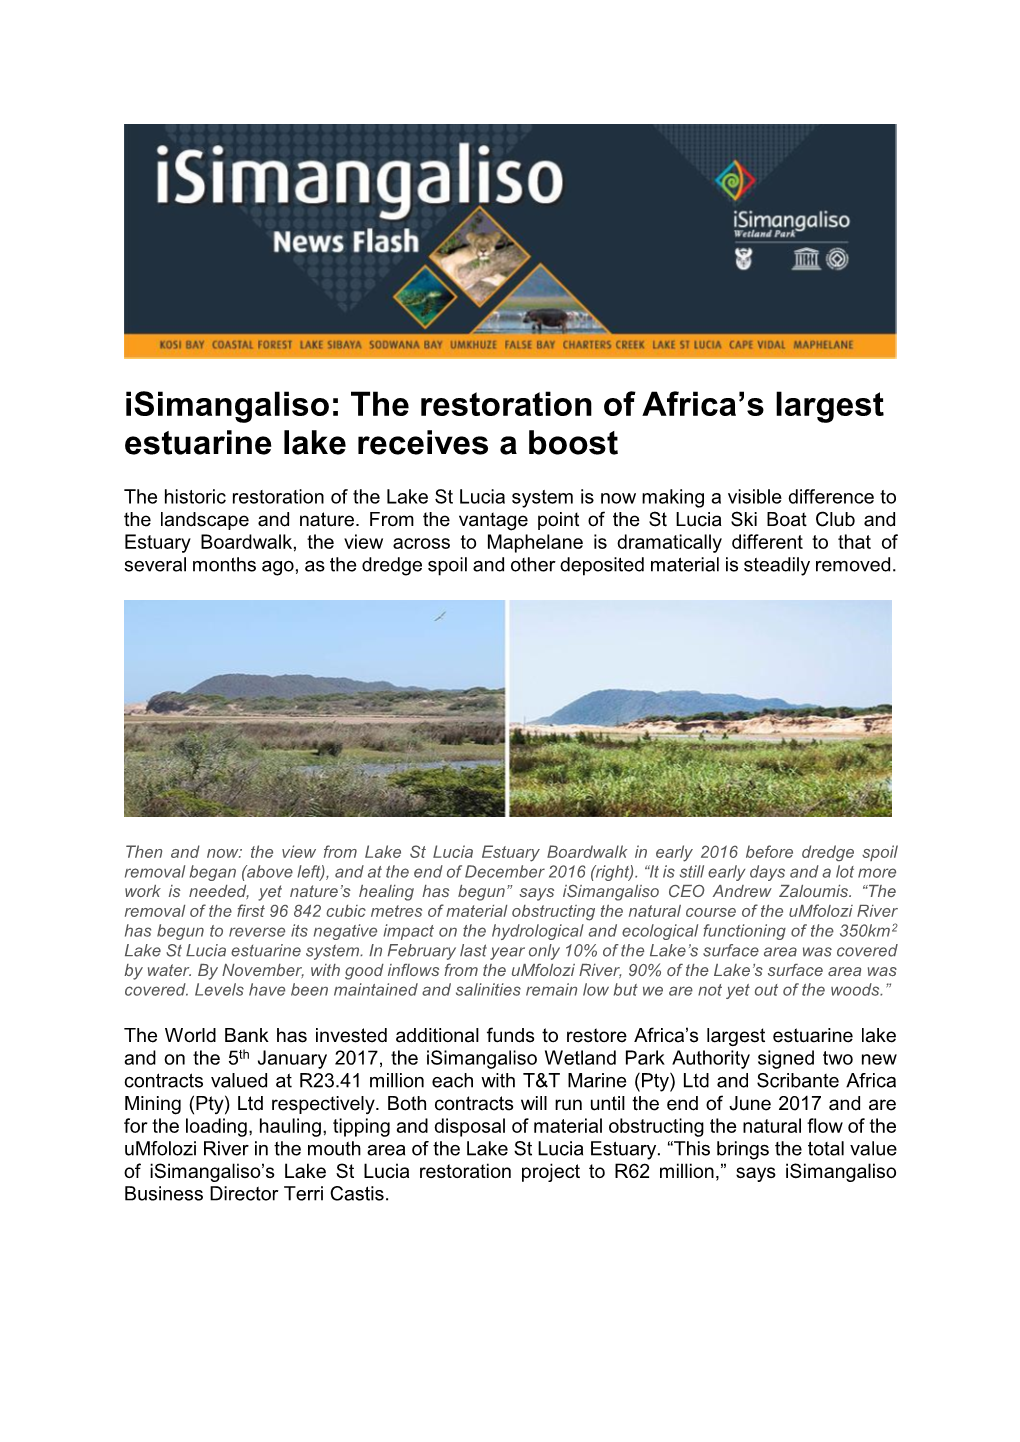 The Restoration of Africa's Largest Estuarine Lake Receives a Boost